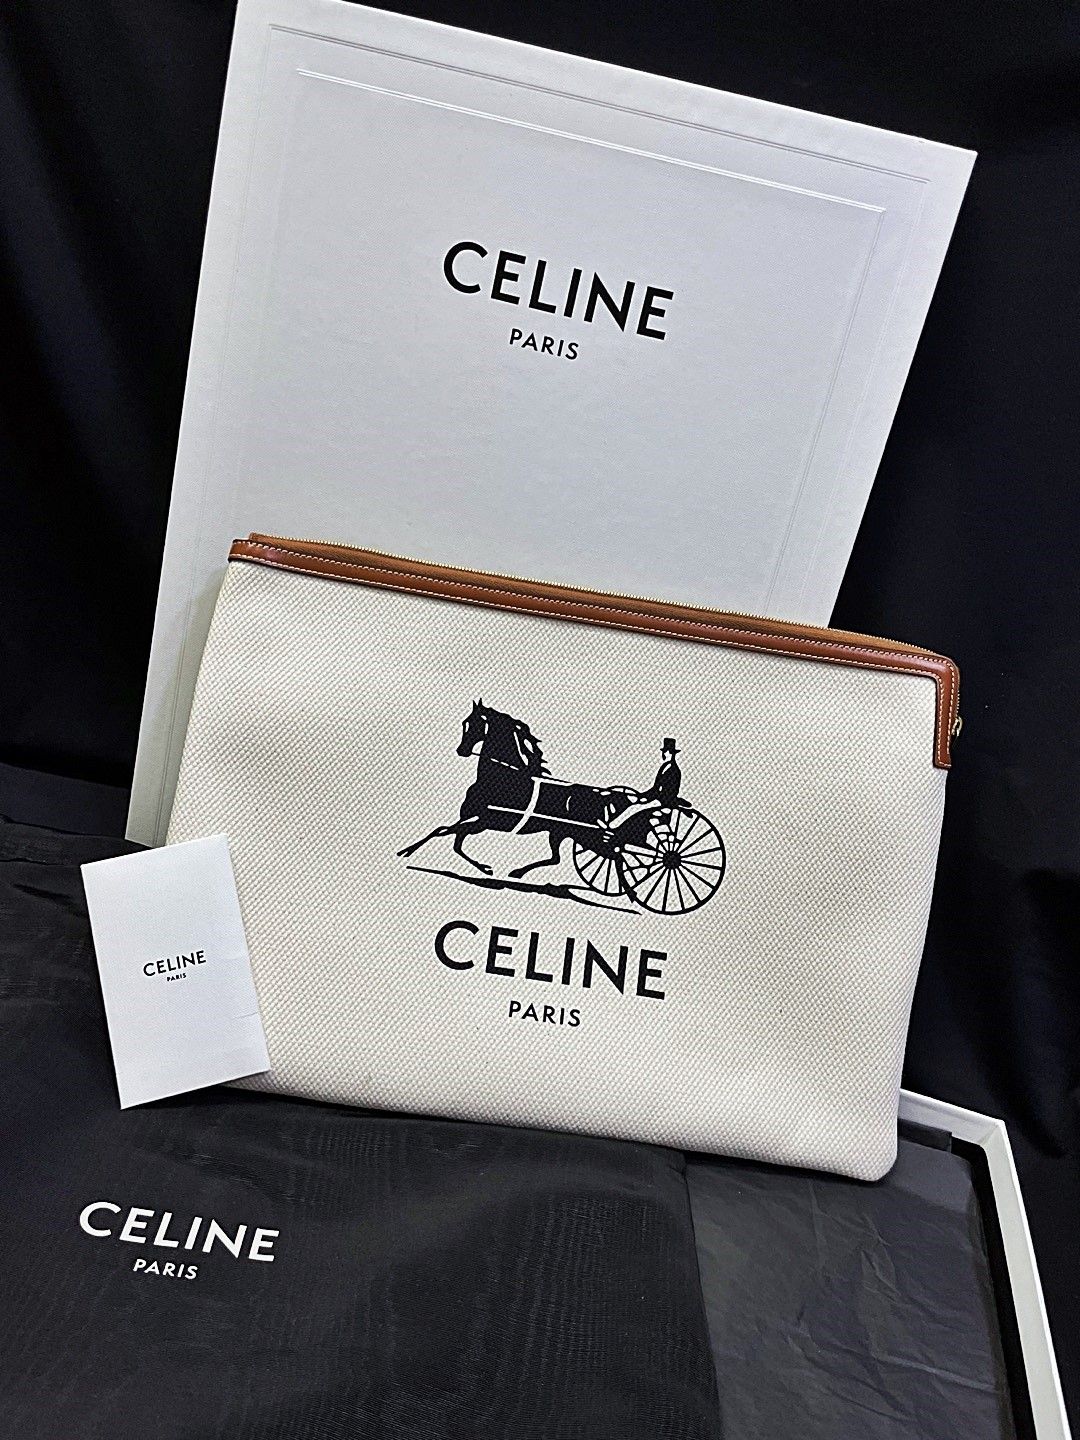 Celine Small Pouch with Strap